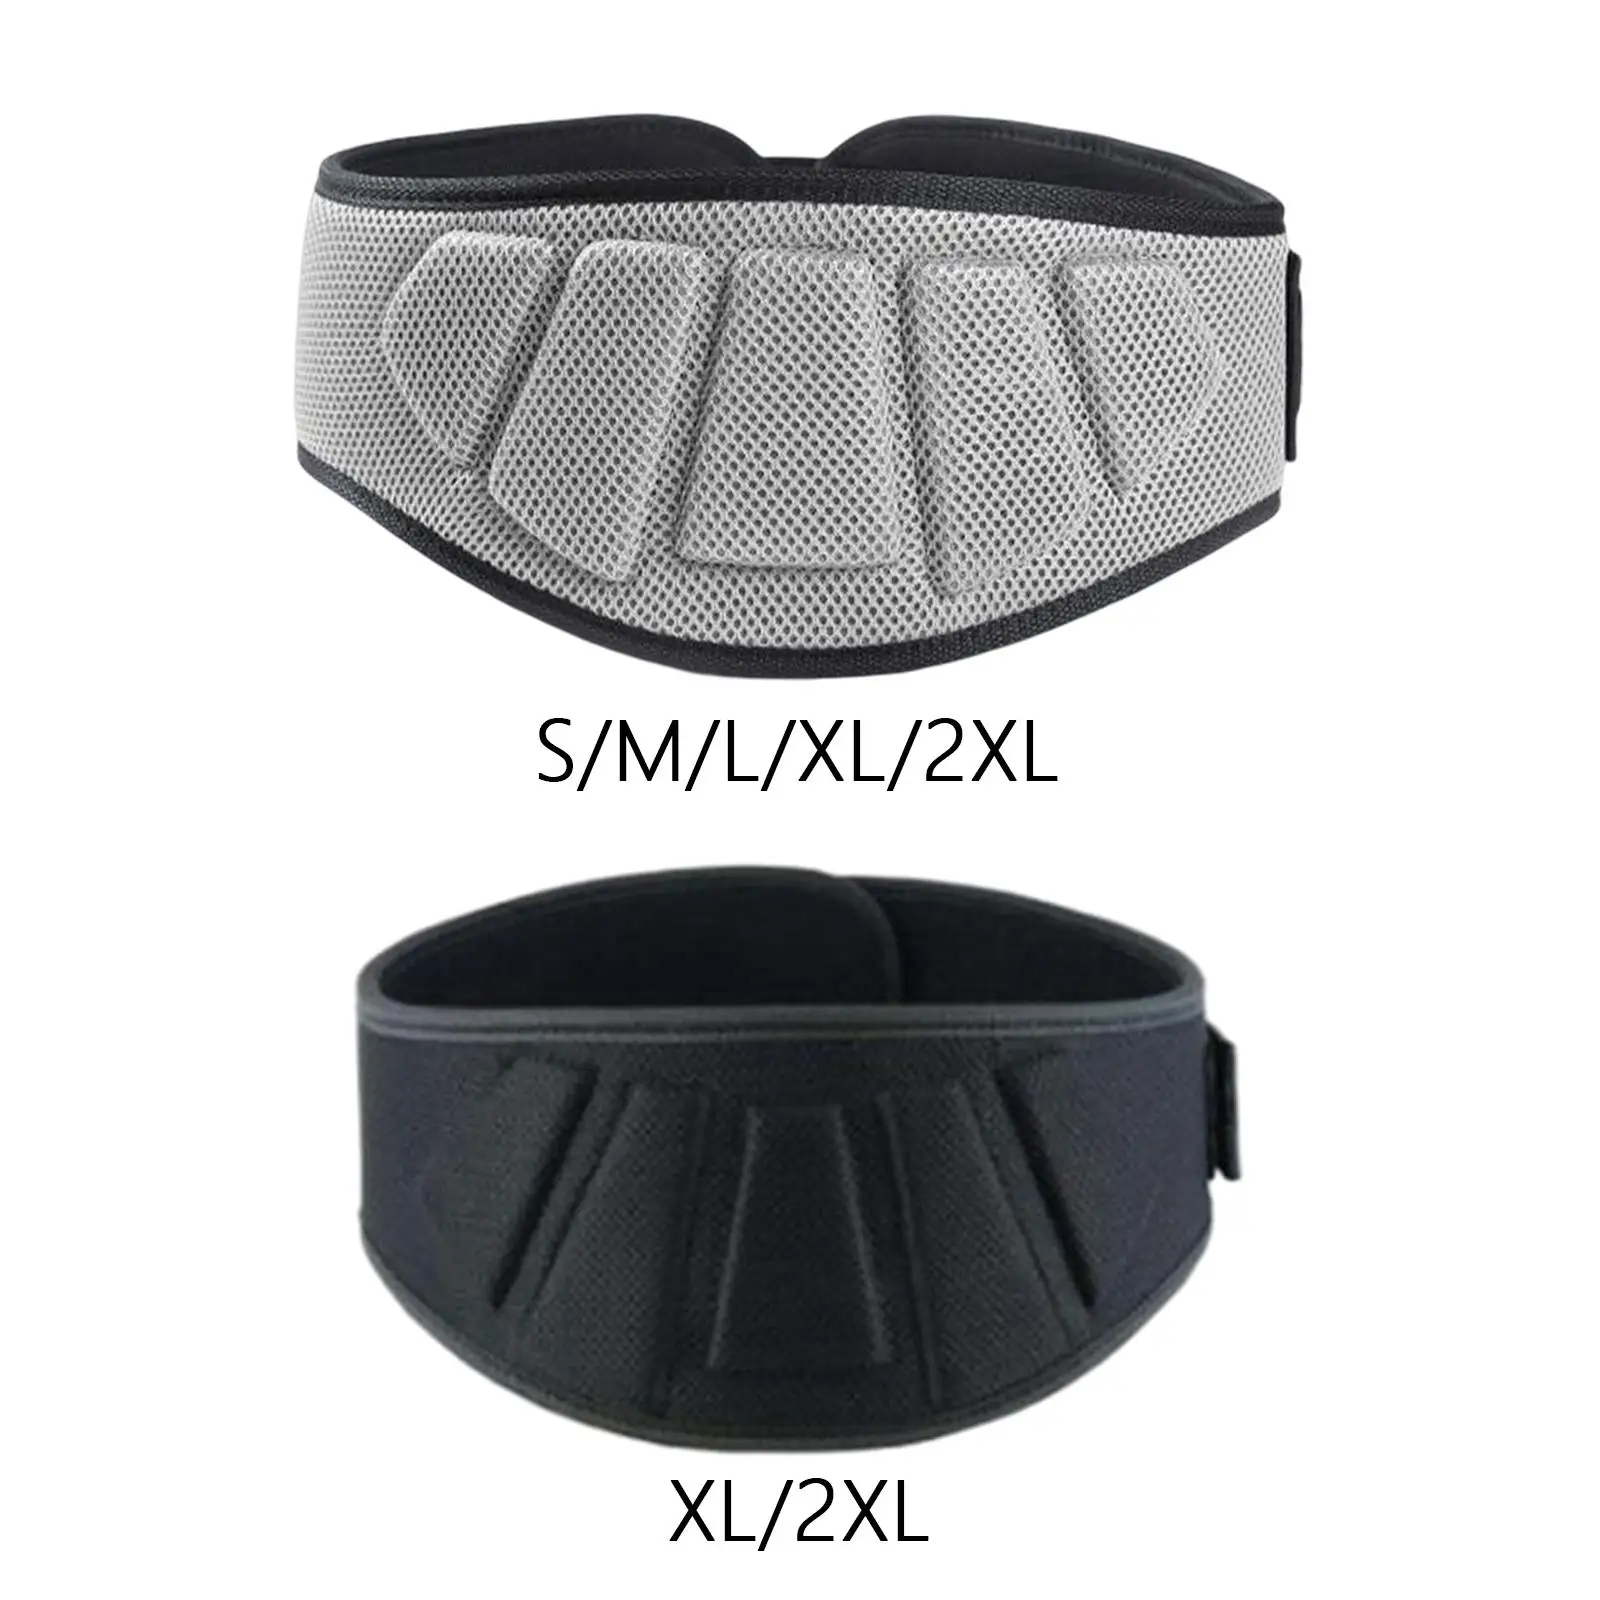 Adjustable Weight Lifting Belt, Support Fitness, Accessories Gym Weightlifting